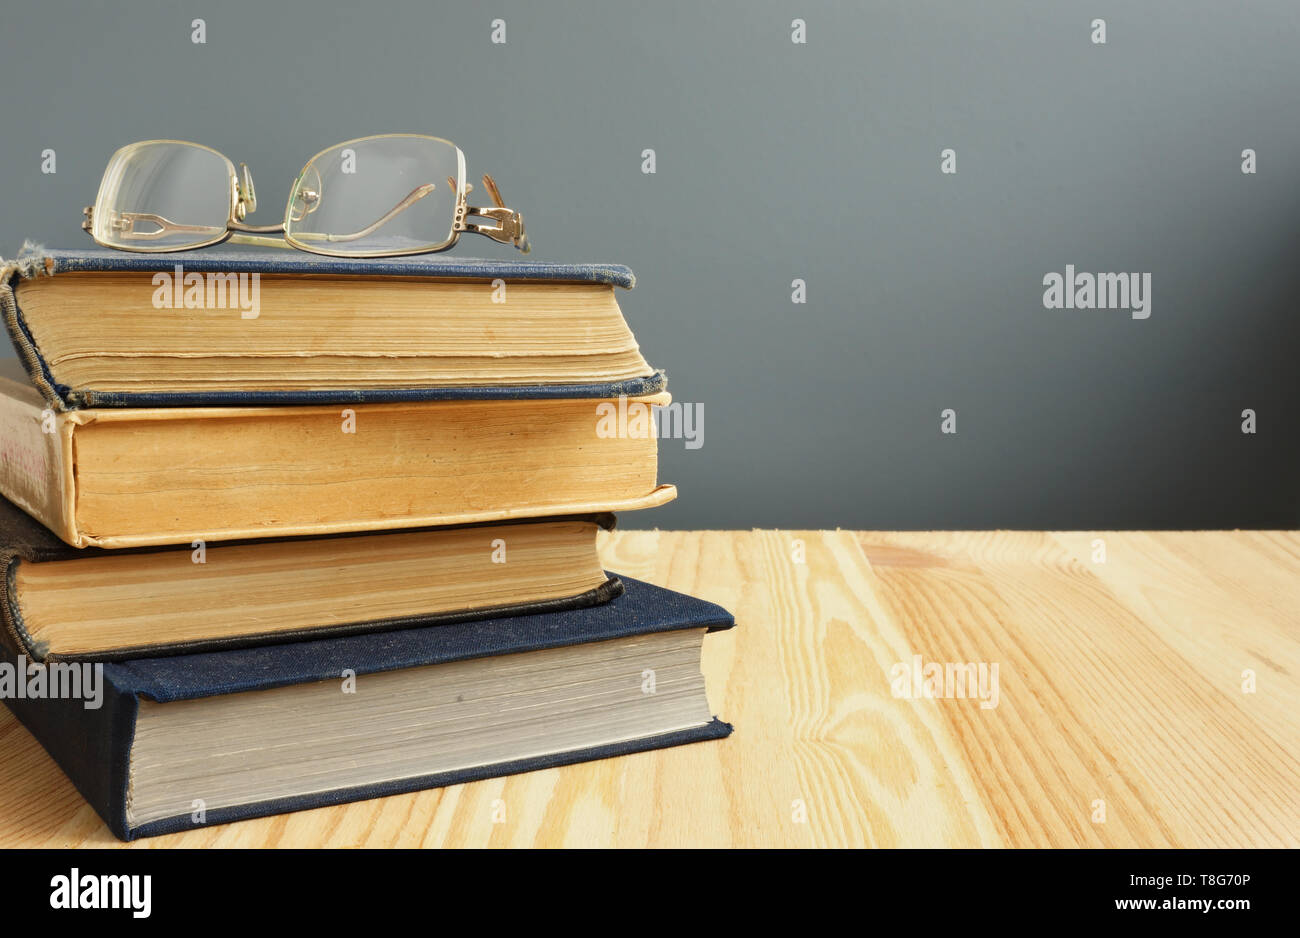 Retro books and old eyeglasses on wooden table. Stock Photo